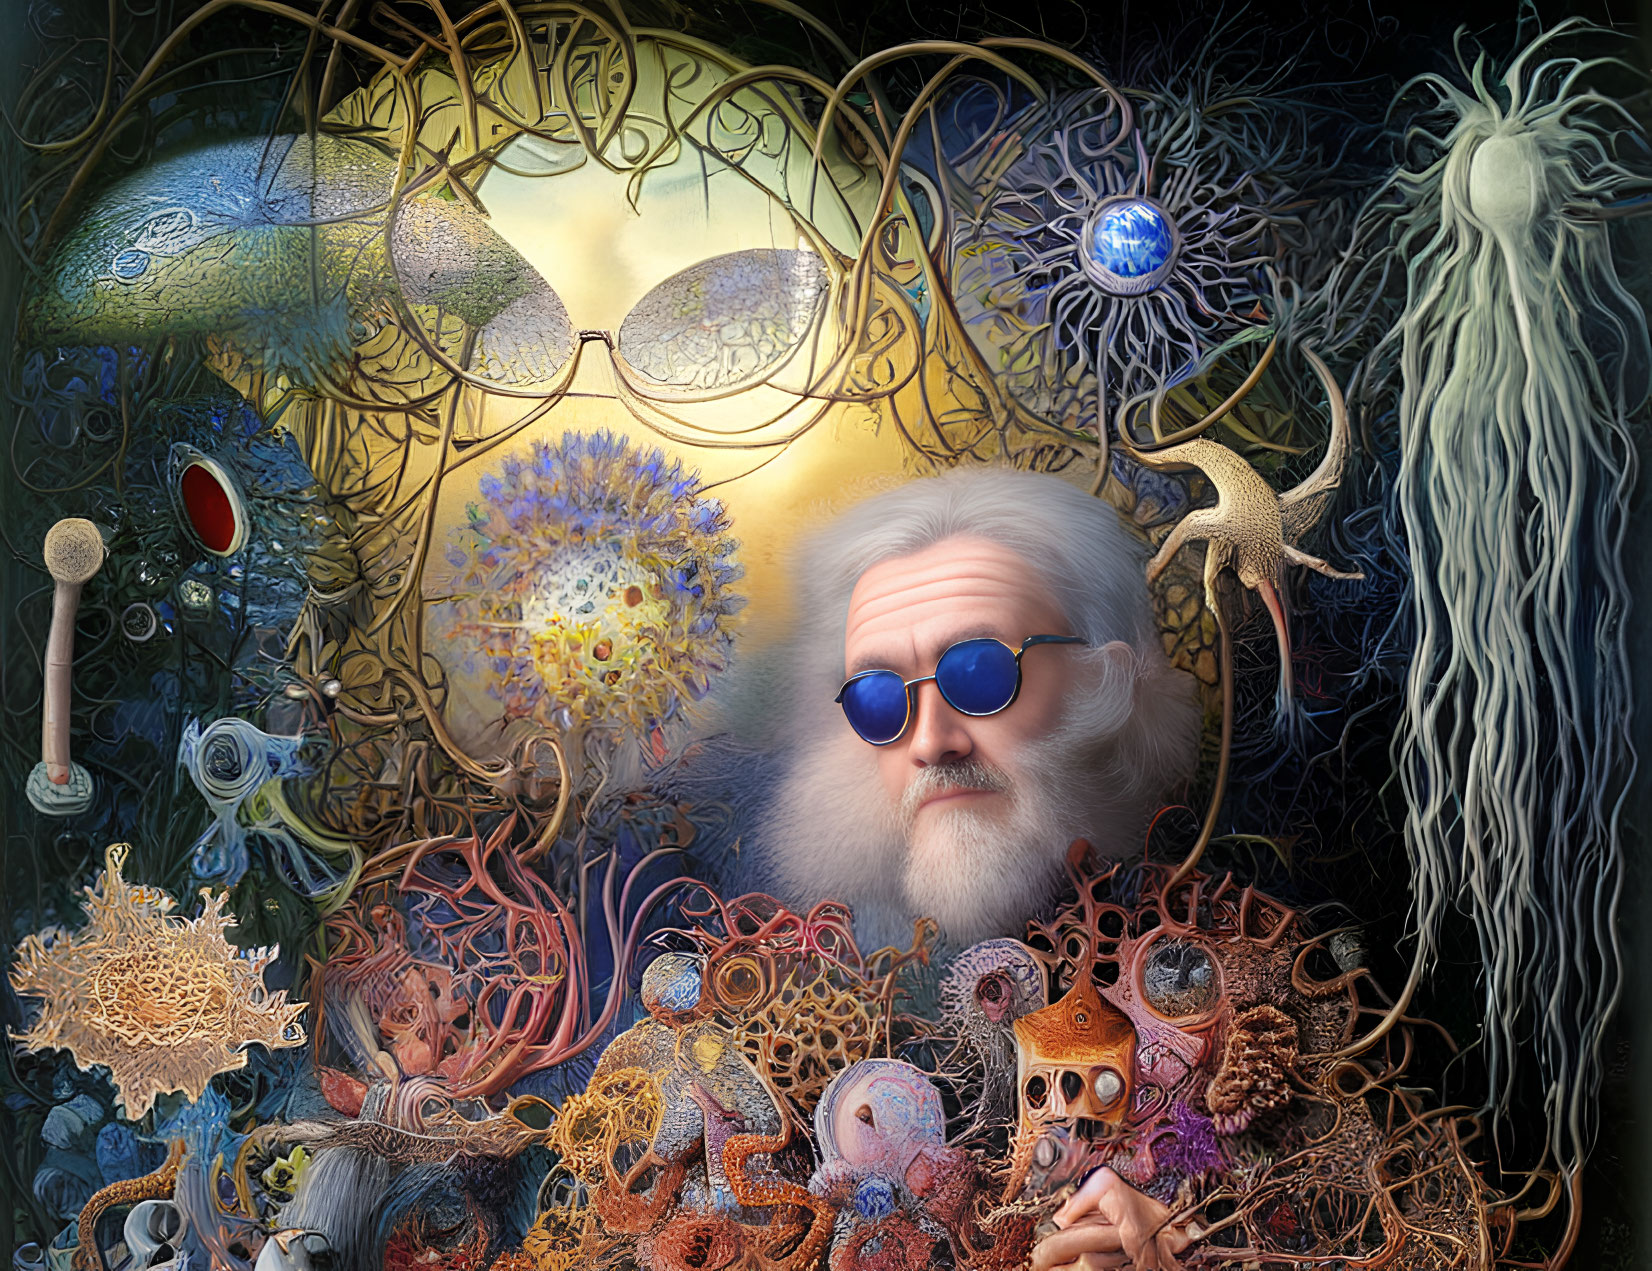 Surreal portrait of man with white beard and blue sunglasses among marine life motifs